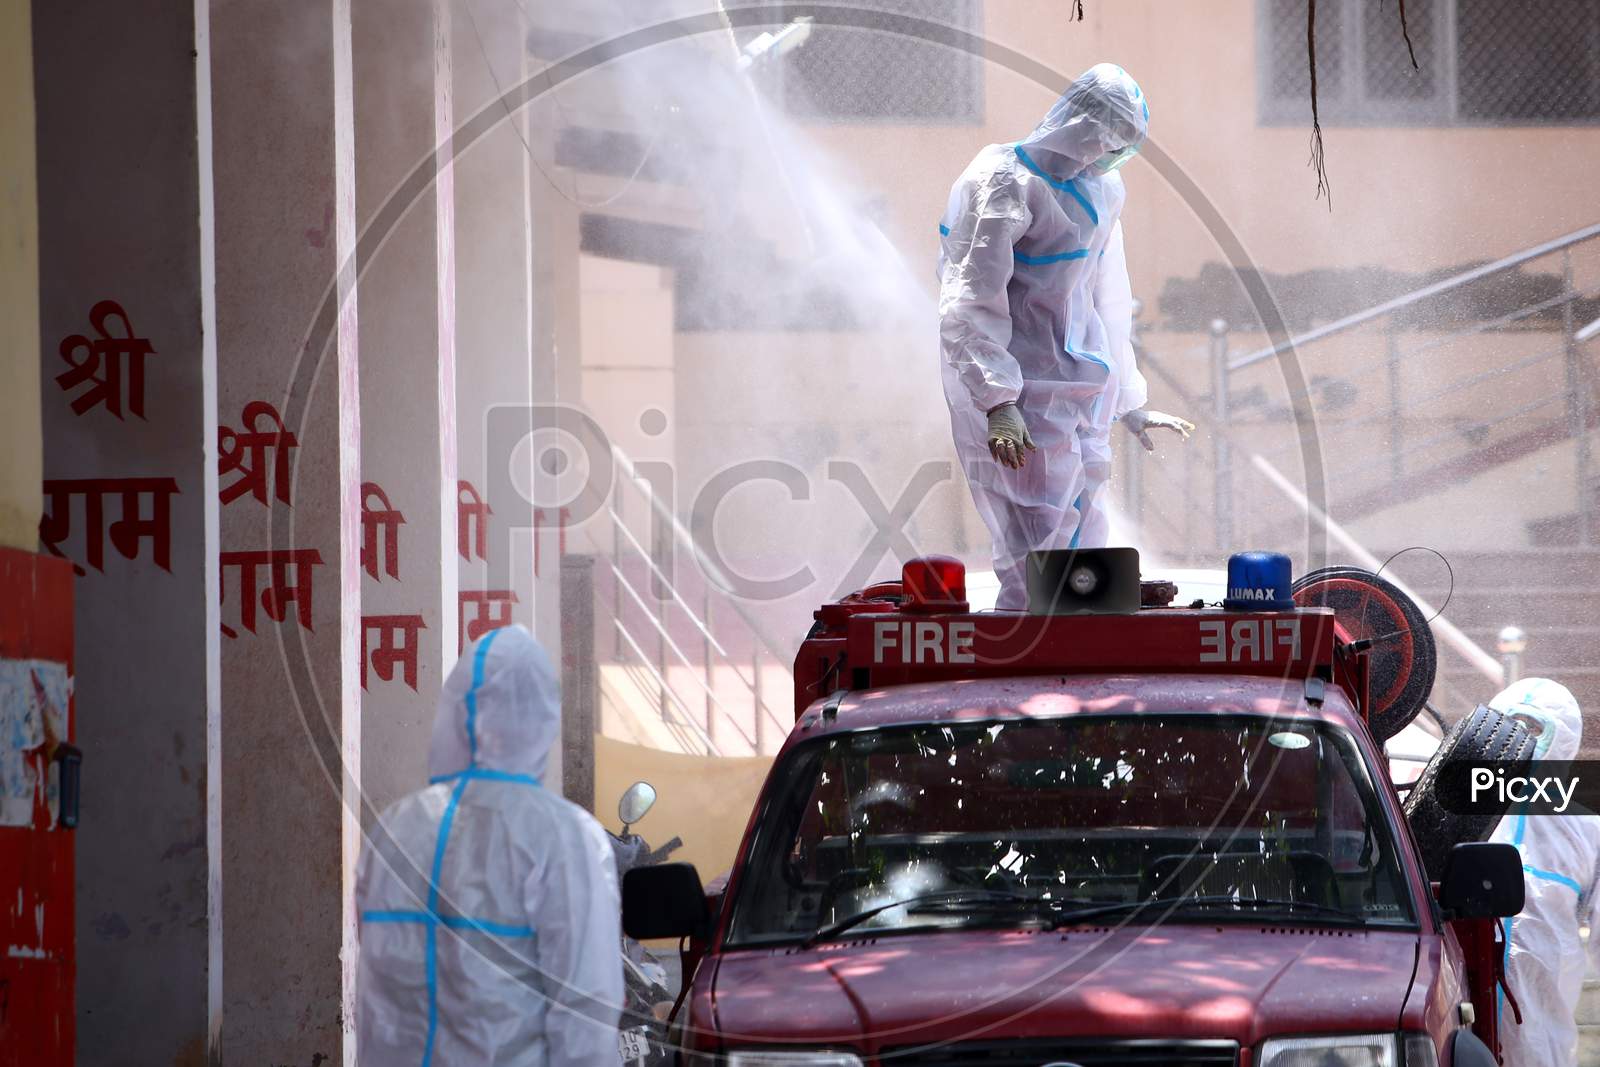 Health Workers Wearing Personal Protective Equipment (Ppe) Disinfect As A Preventive Measure Against The Spread Of The New Coronavirus Covid-19, After A Cremation Of A Woman, Who Died Of Covid-19 In Ajmer, Rajasthan, India On June 9, 2020.